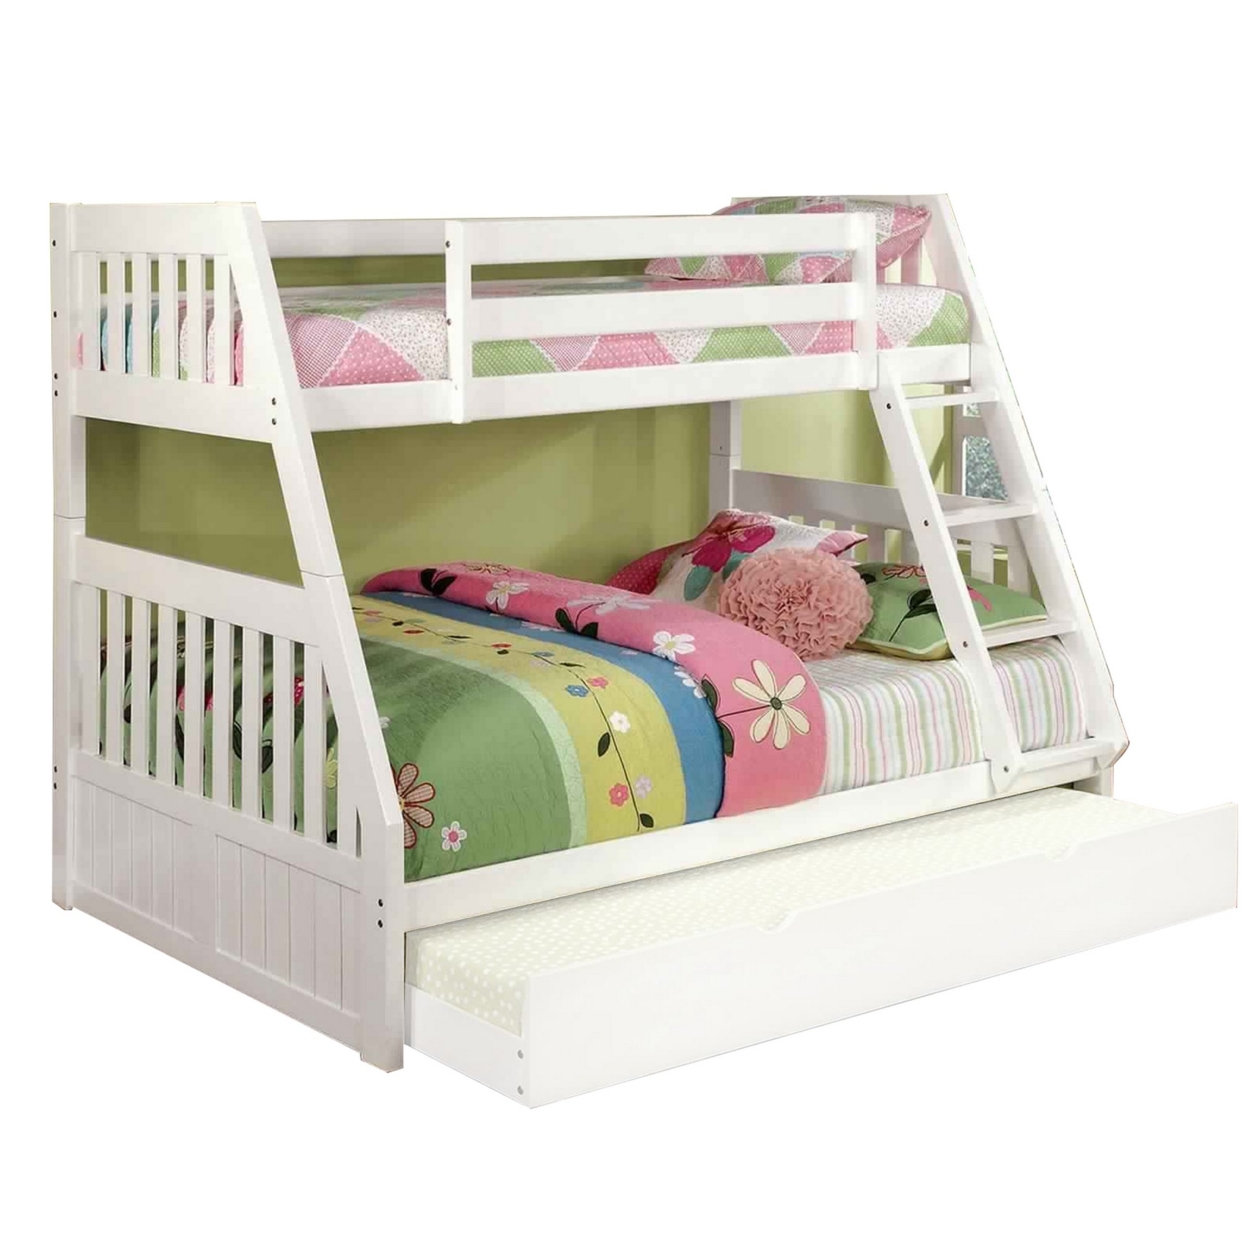 Mission Style Twin Over Full Size Bed With Attached Ladder, White- Saltoro Sherpi